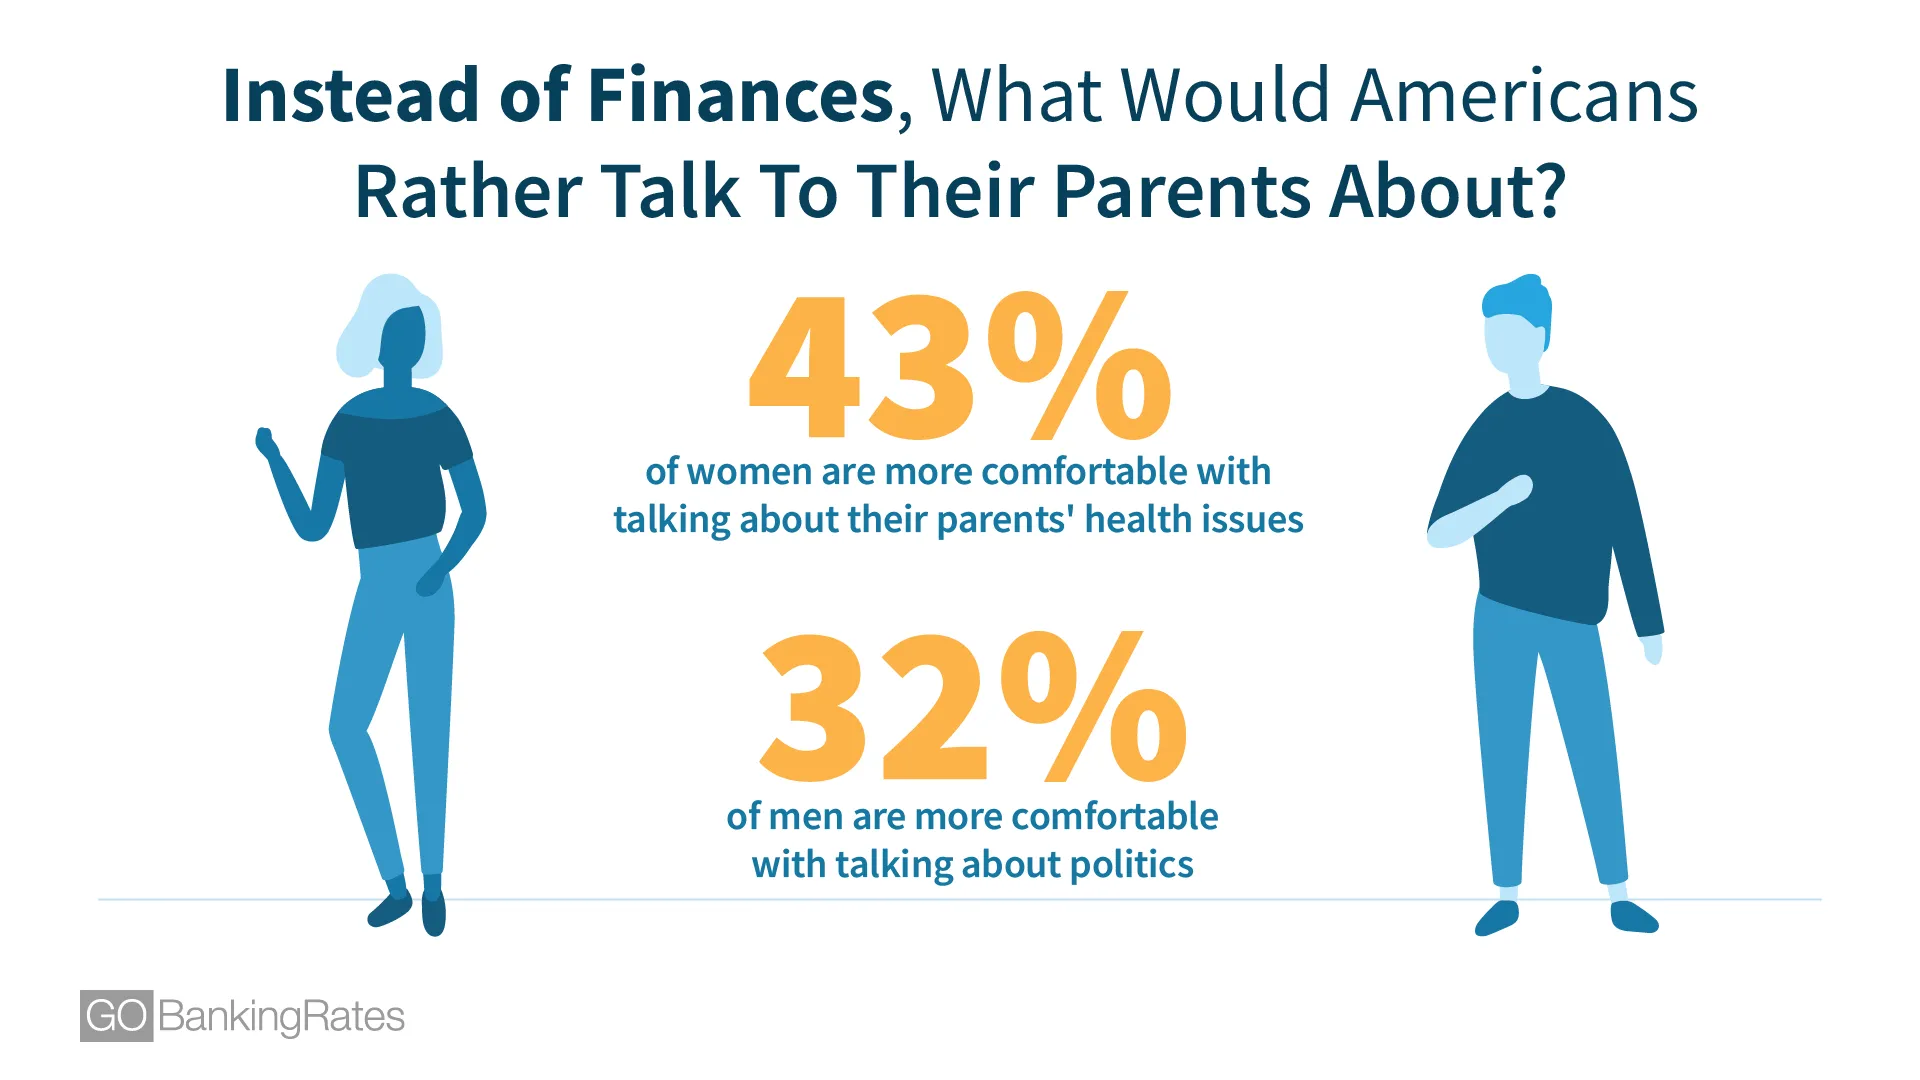 Instead of Finances, What Would Americans Rather Talk To Their Parents About?